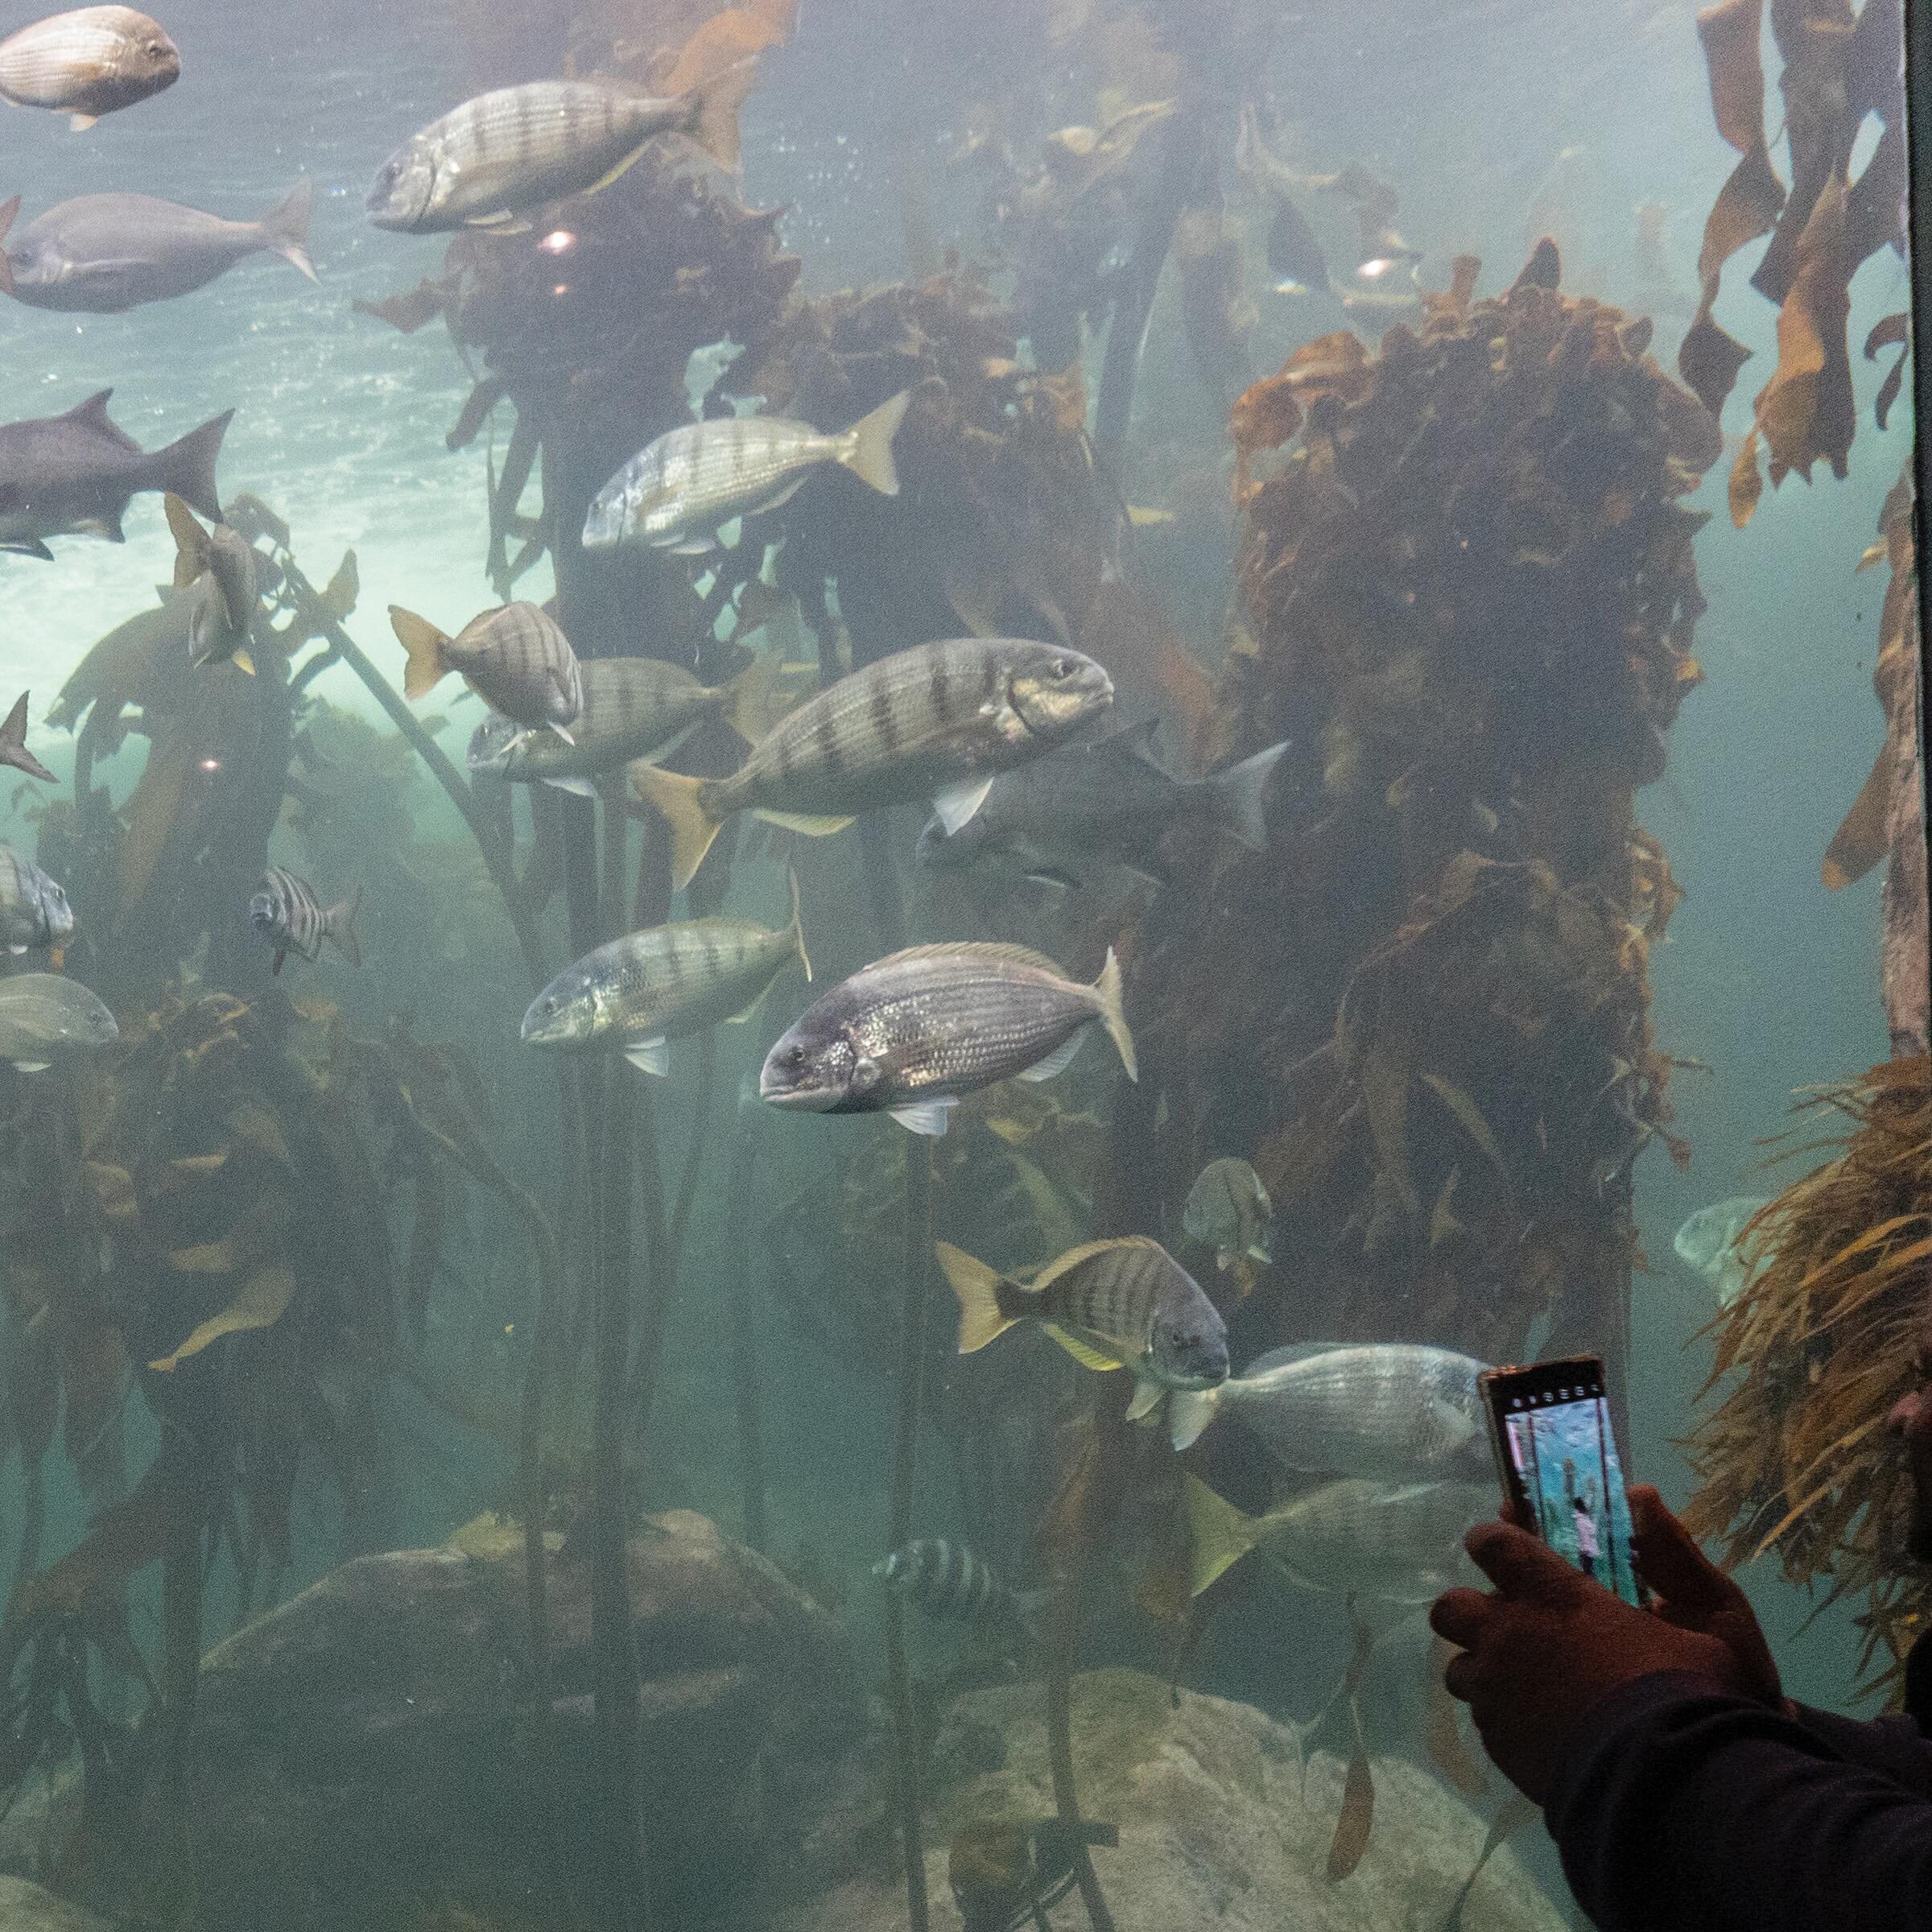 A family visits the Kelp Forest Exhibit at the Two Oceans Aquarium in Cape Town, South Africa, August 13, 2023. Adriane Ohanesian for the Bulletin of the Atomic Scientists

Kelp forests cover six to seven million square kilometers of ocean&mdash;an a